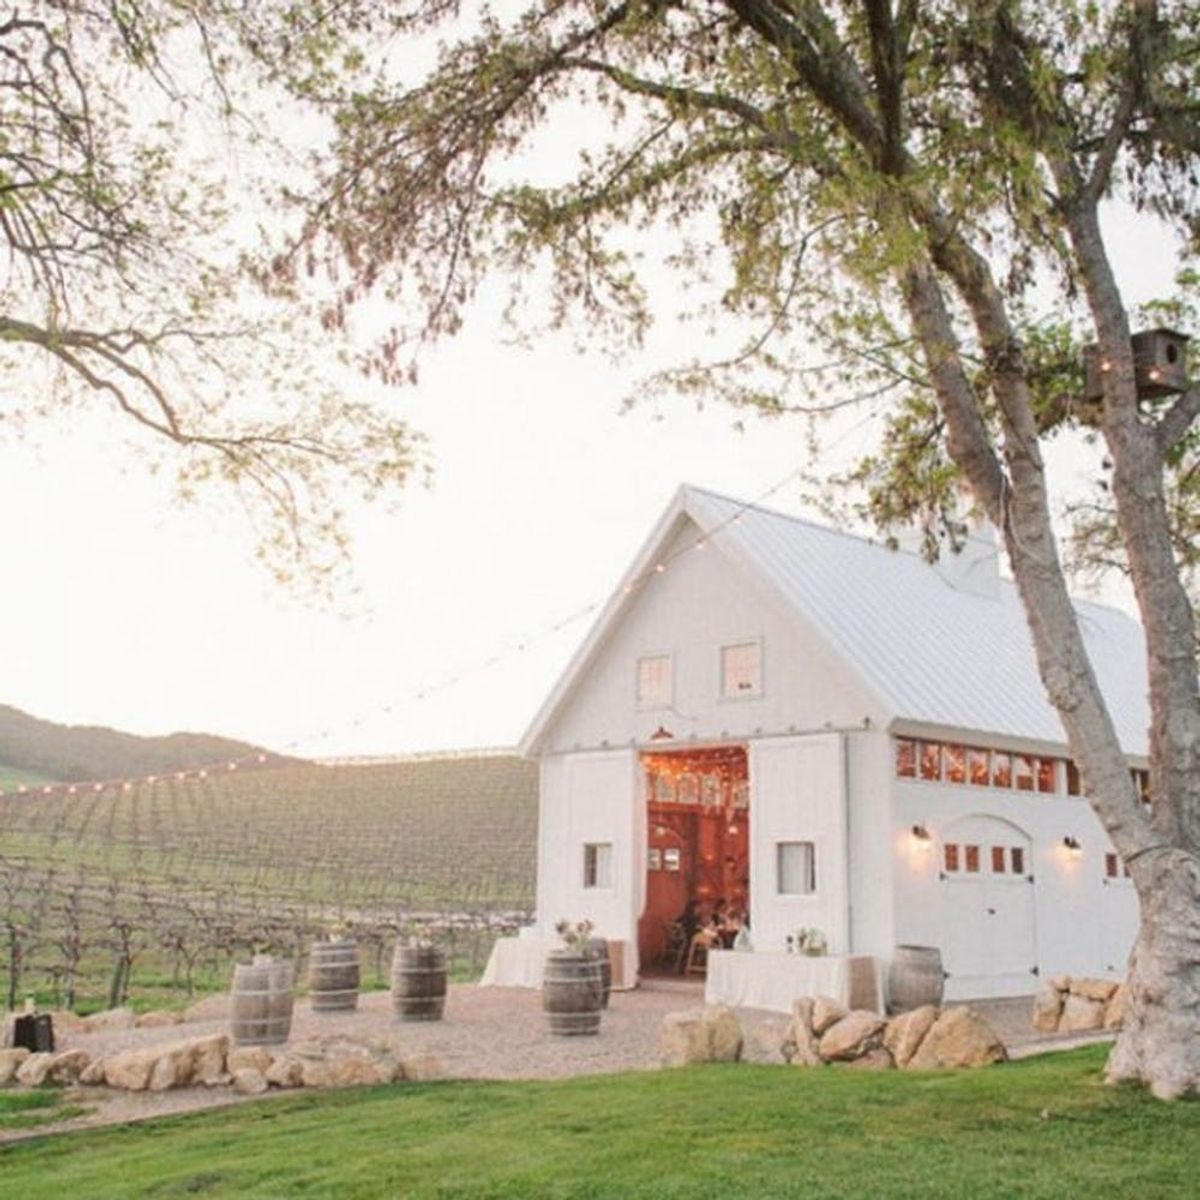 The Best Barn Venues for Your Rustic Chic Wedding